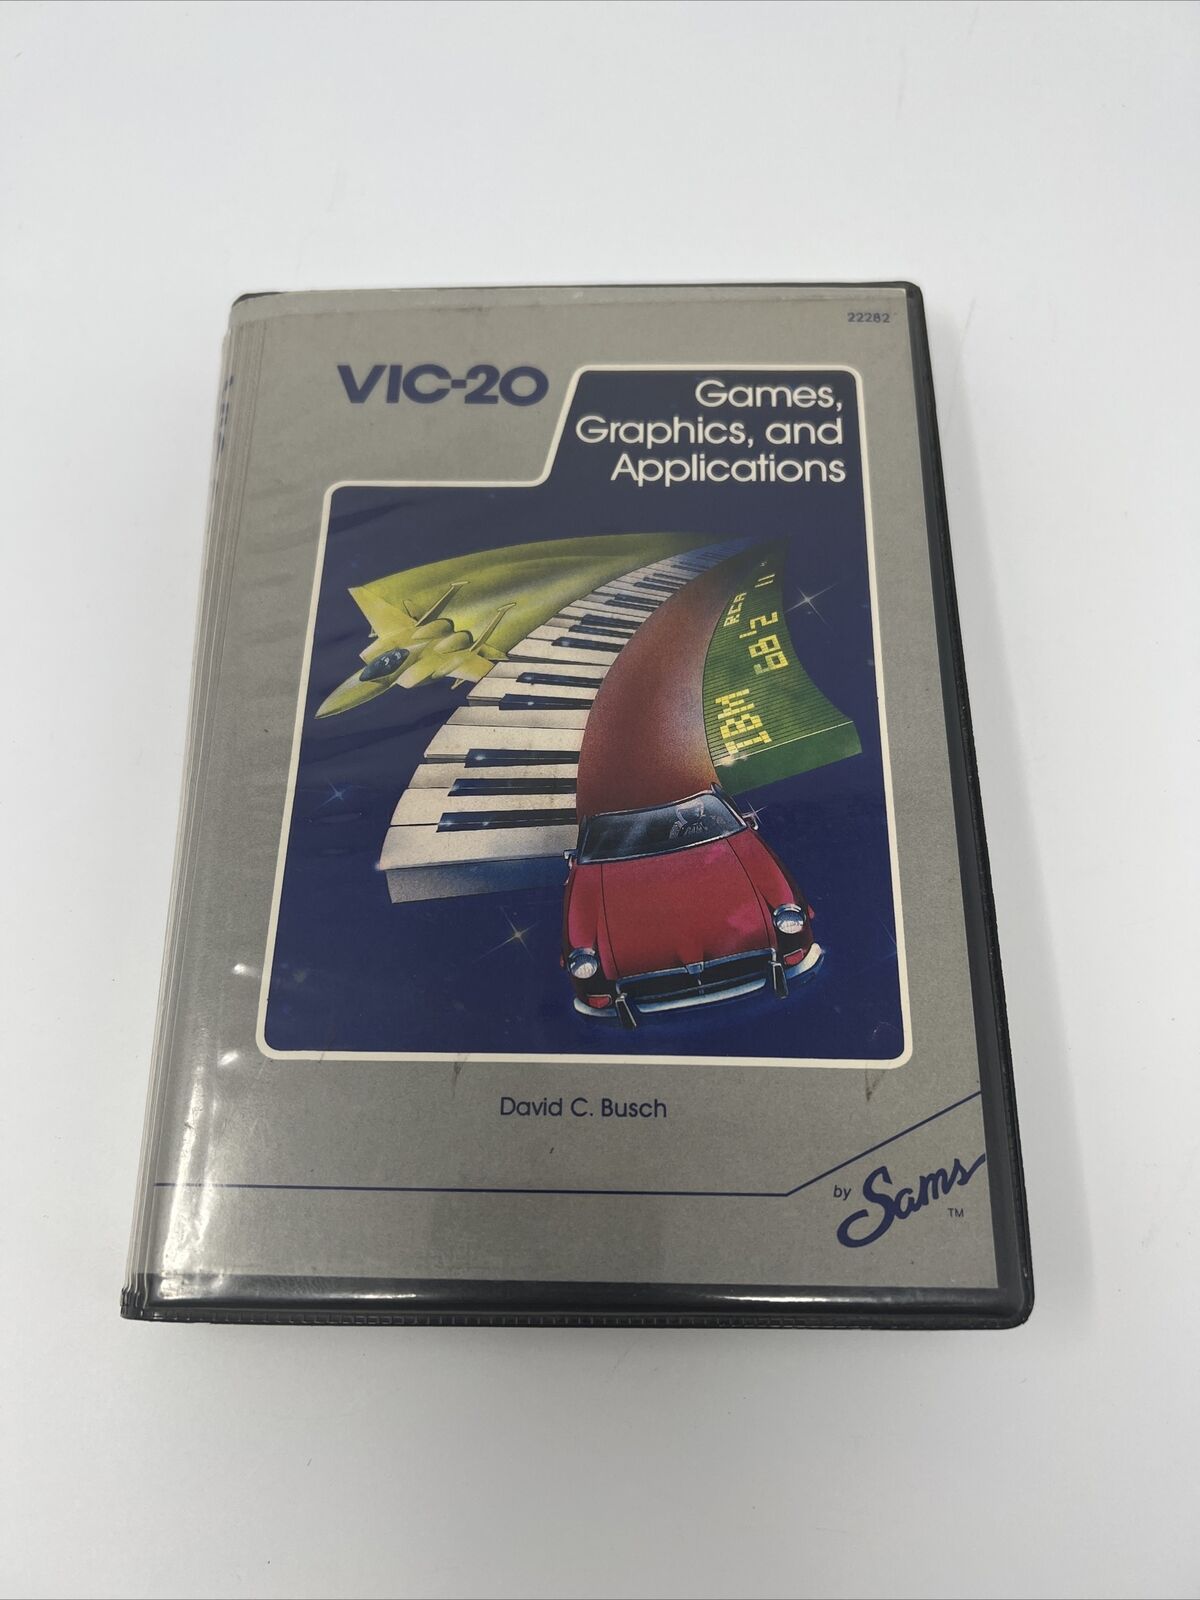 Vintage 1983 1st Edition Commodore Vic-20 Games, Graphics and Applications SAMS